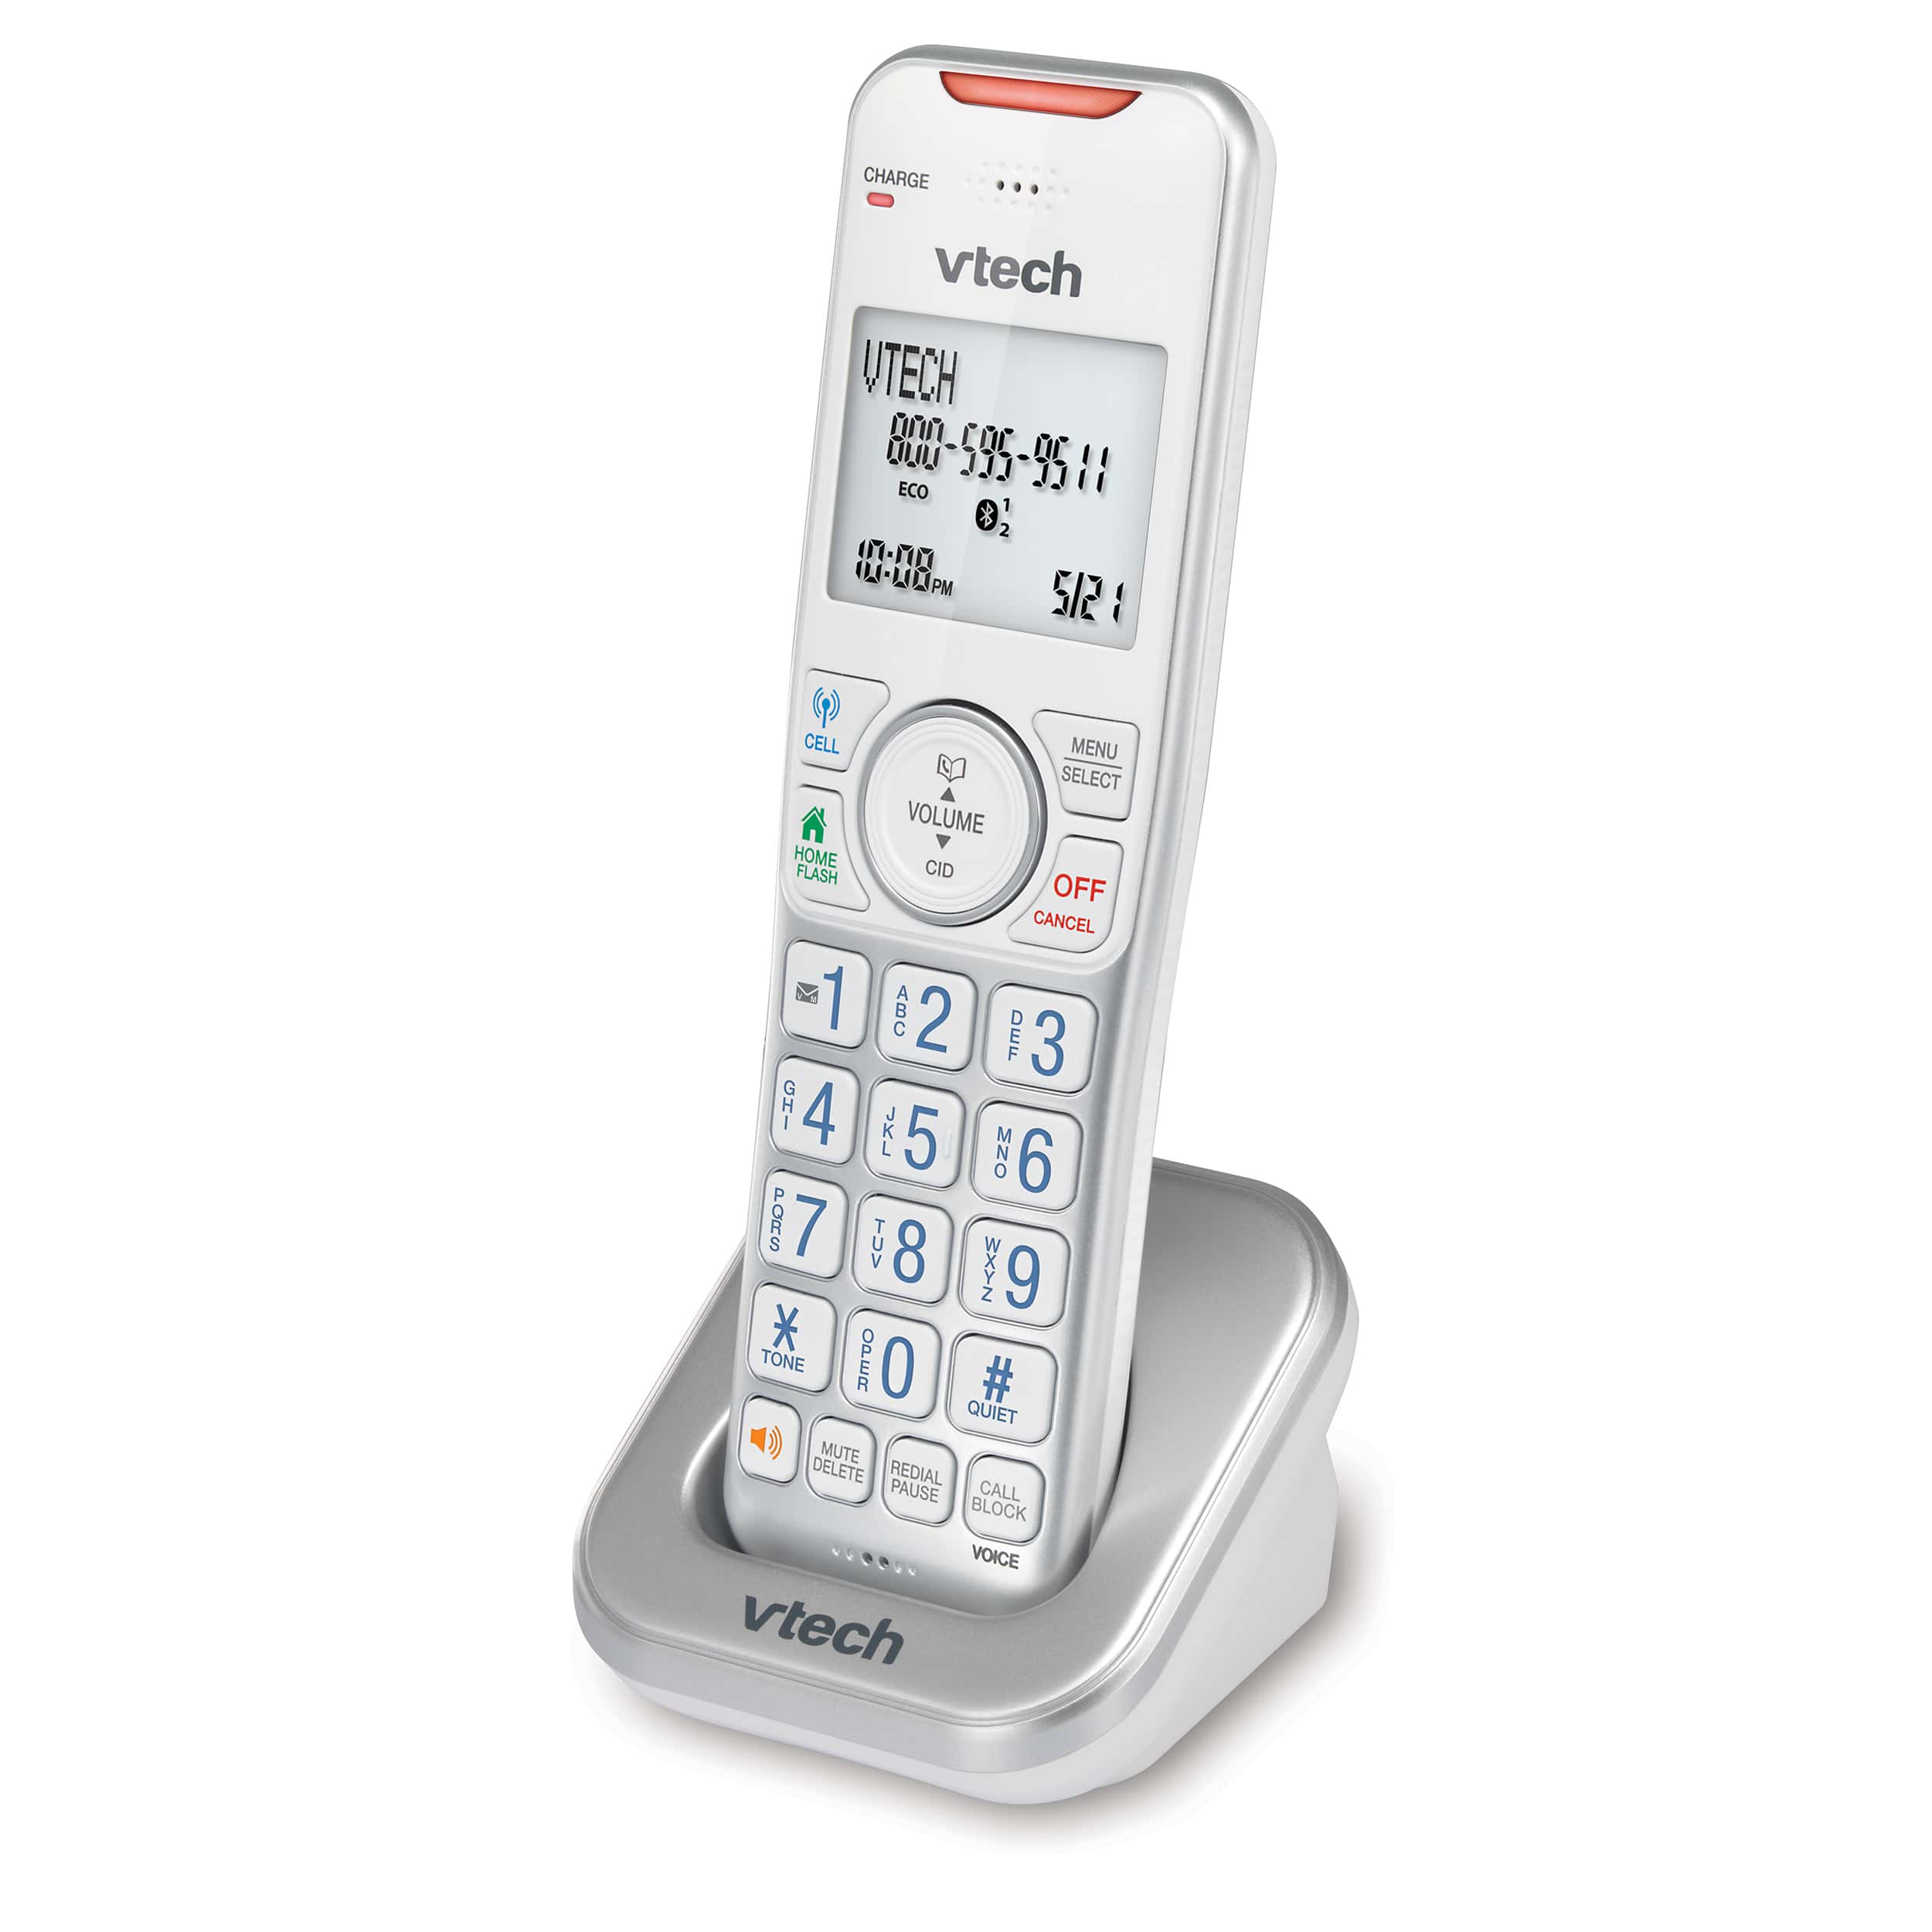 Accessory Handset with Bluetooth Connect to Cell and Smart Call Blocker (Silver & White) - view 2